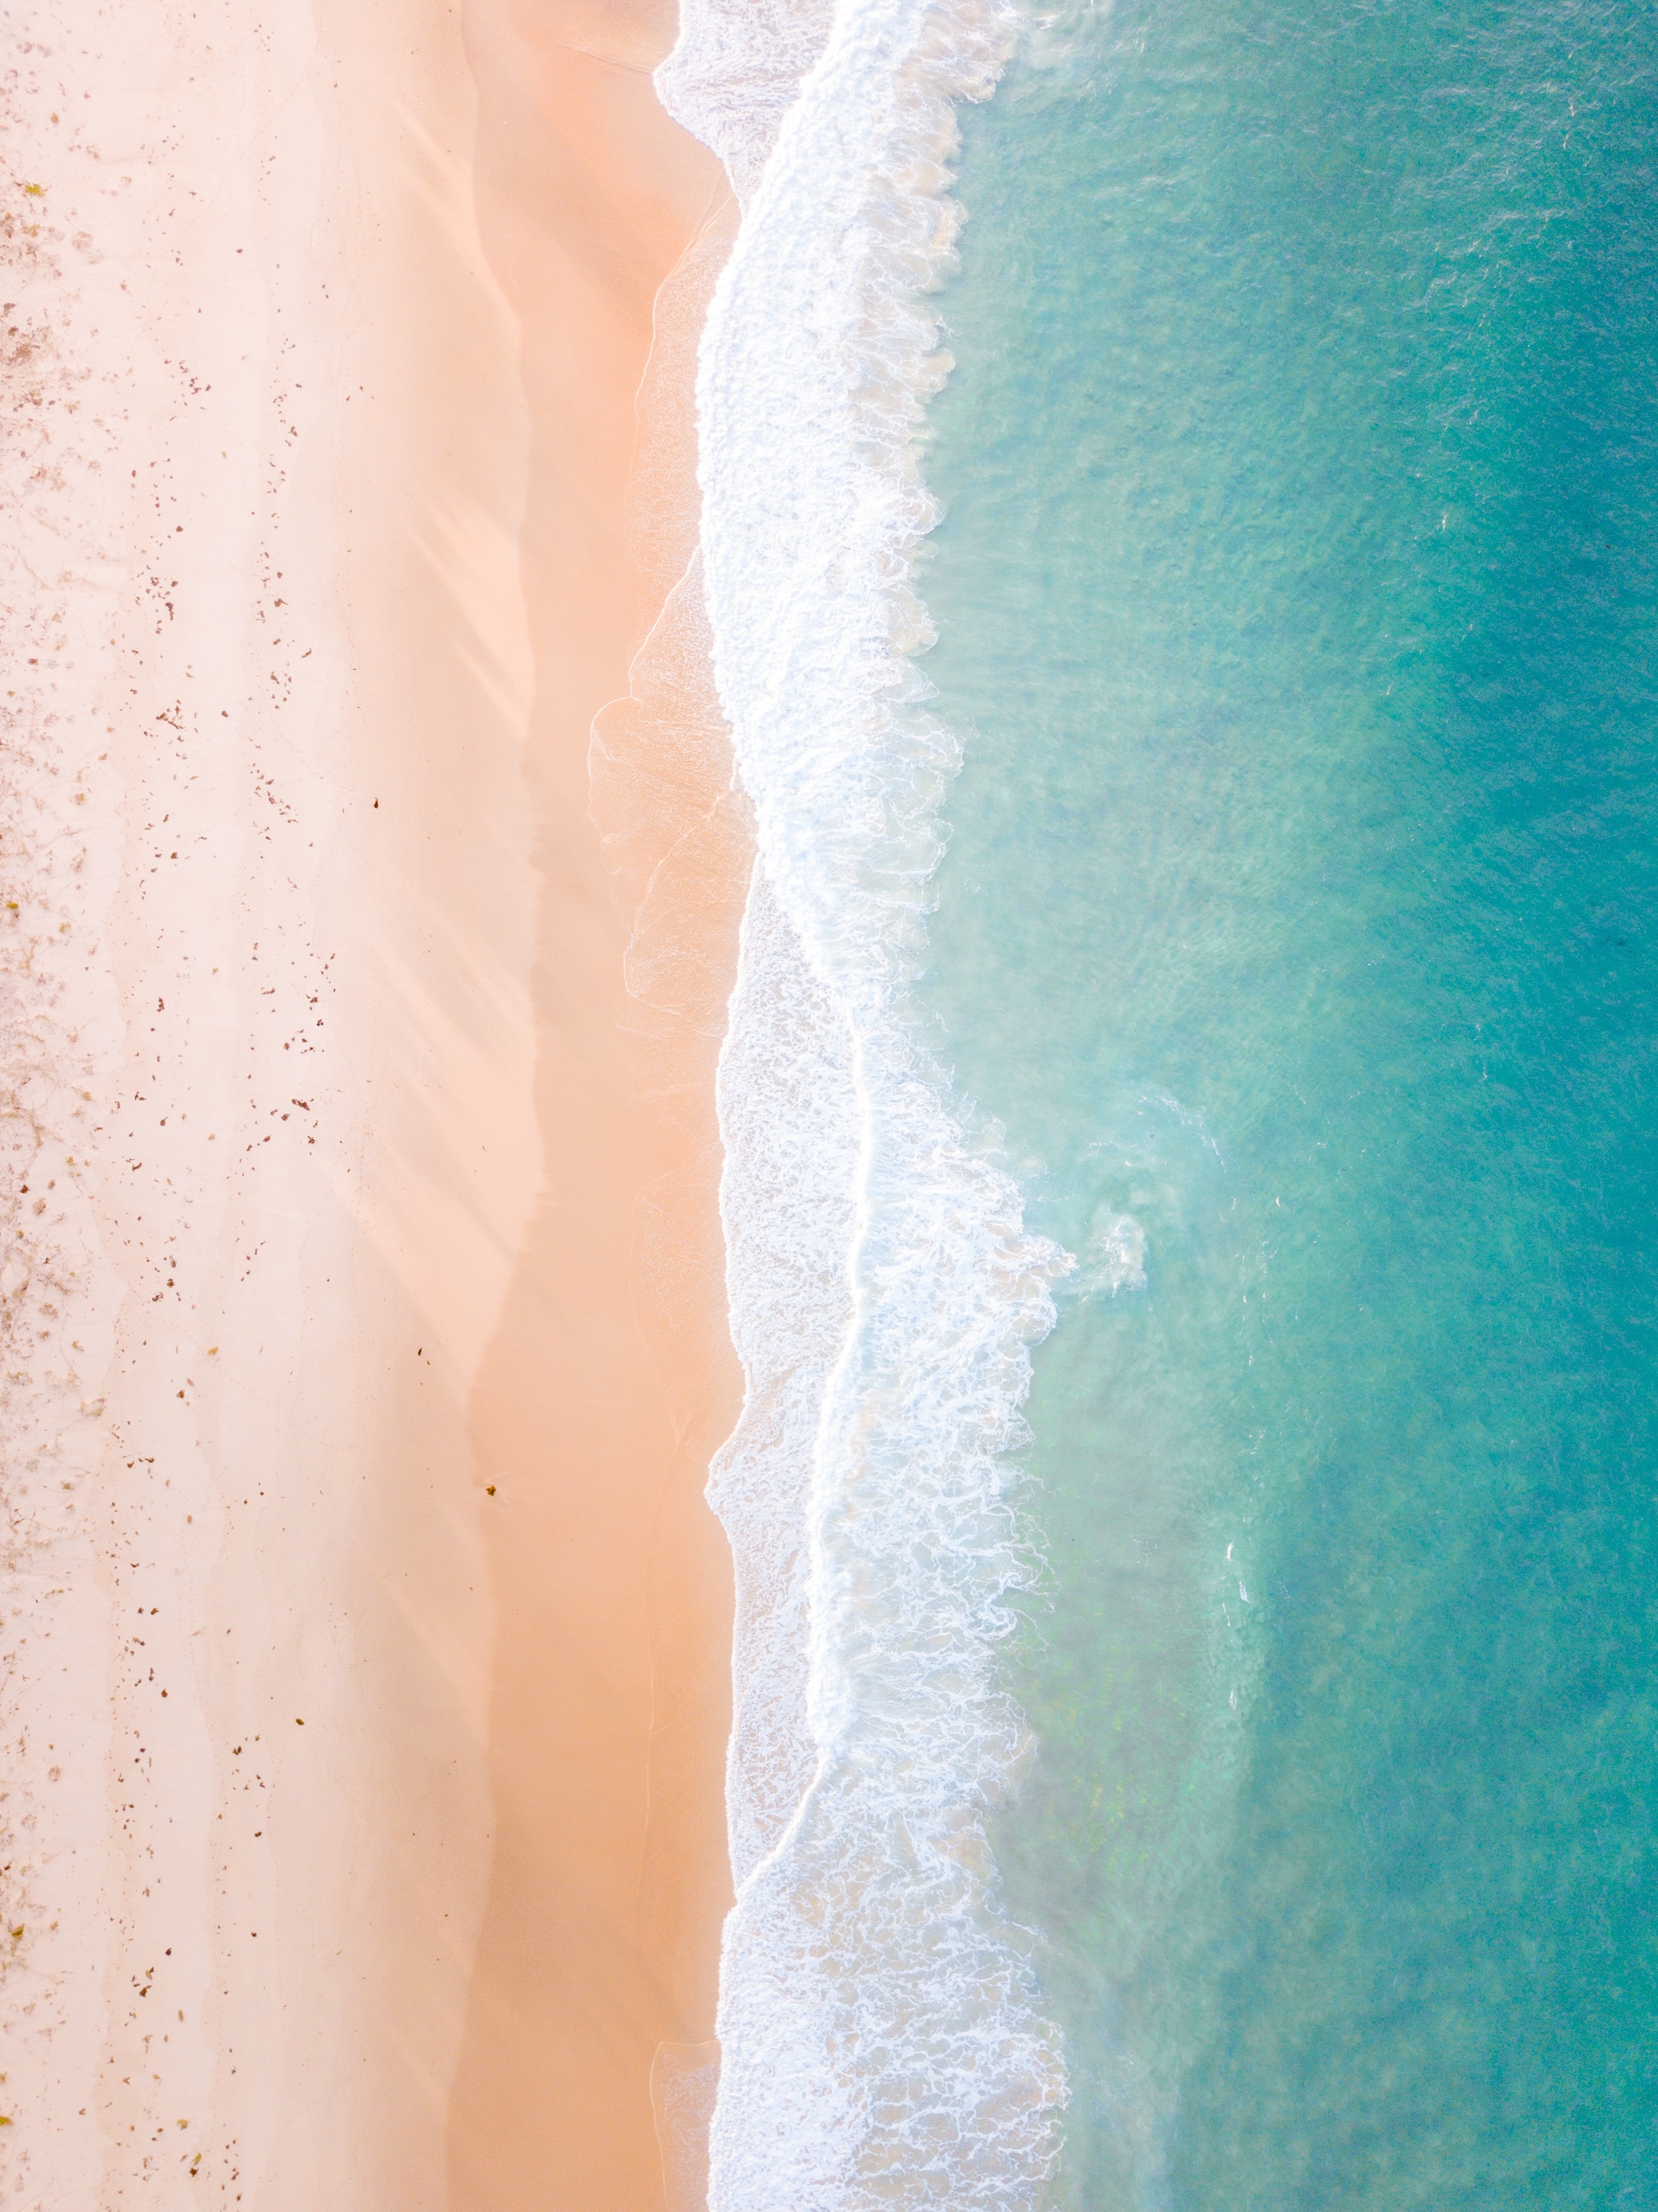 wave, beach, surf, sea, nature, view from above